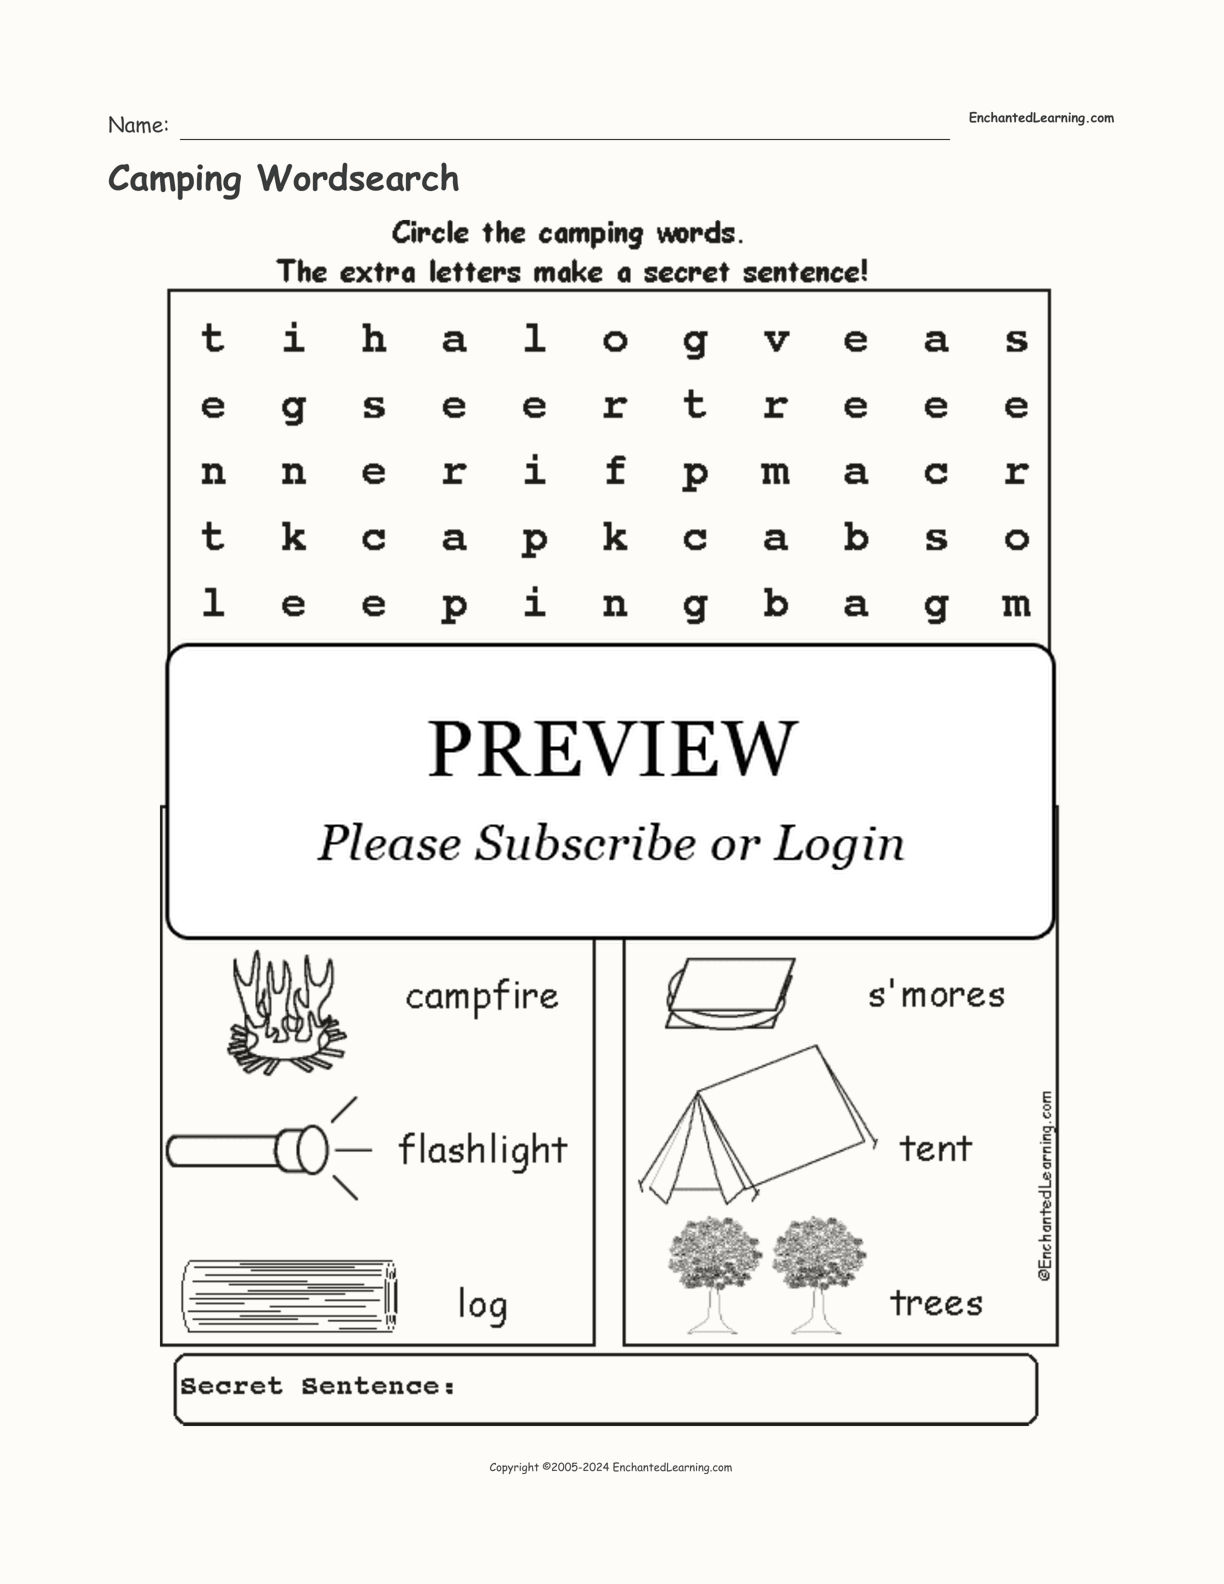 Camping Wordsearch interactive worksheet page 1